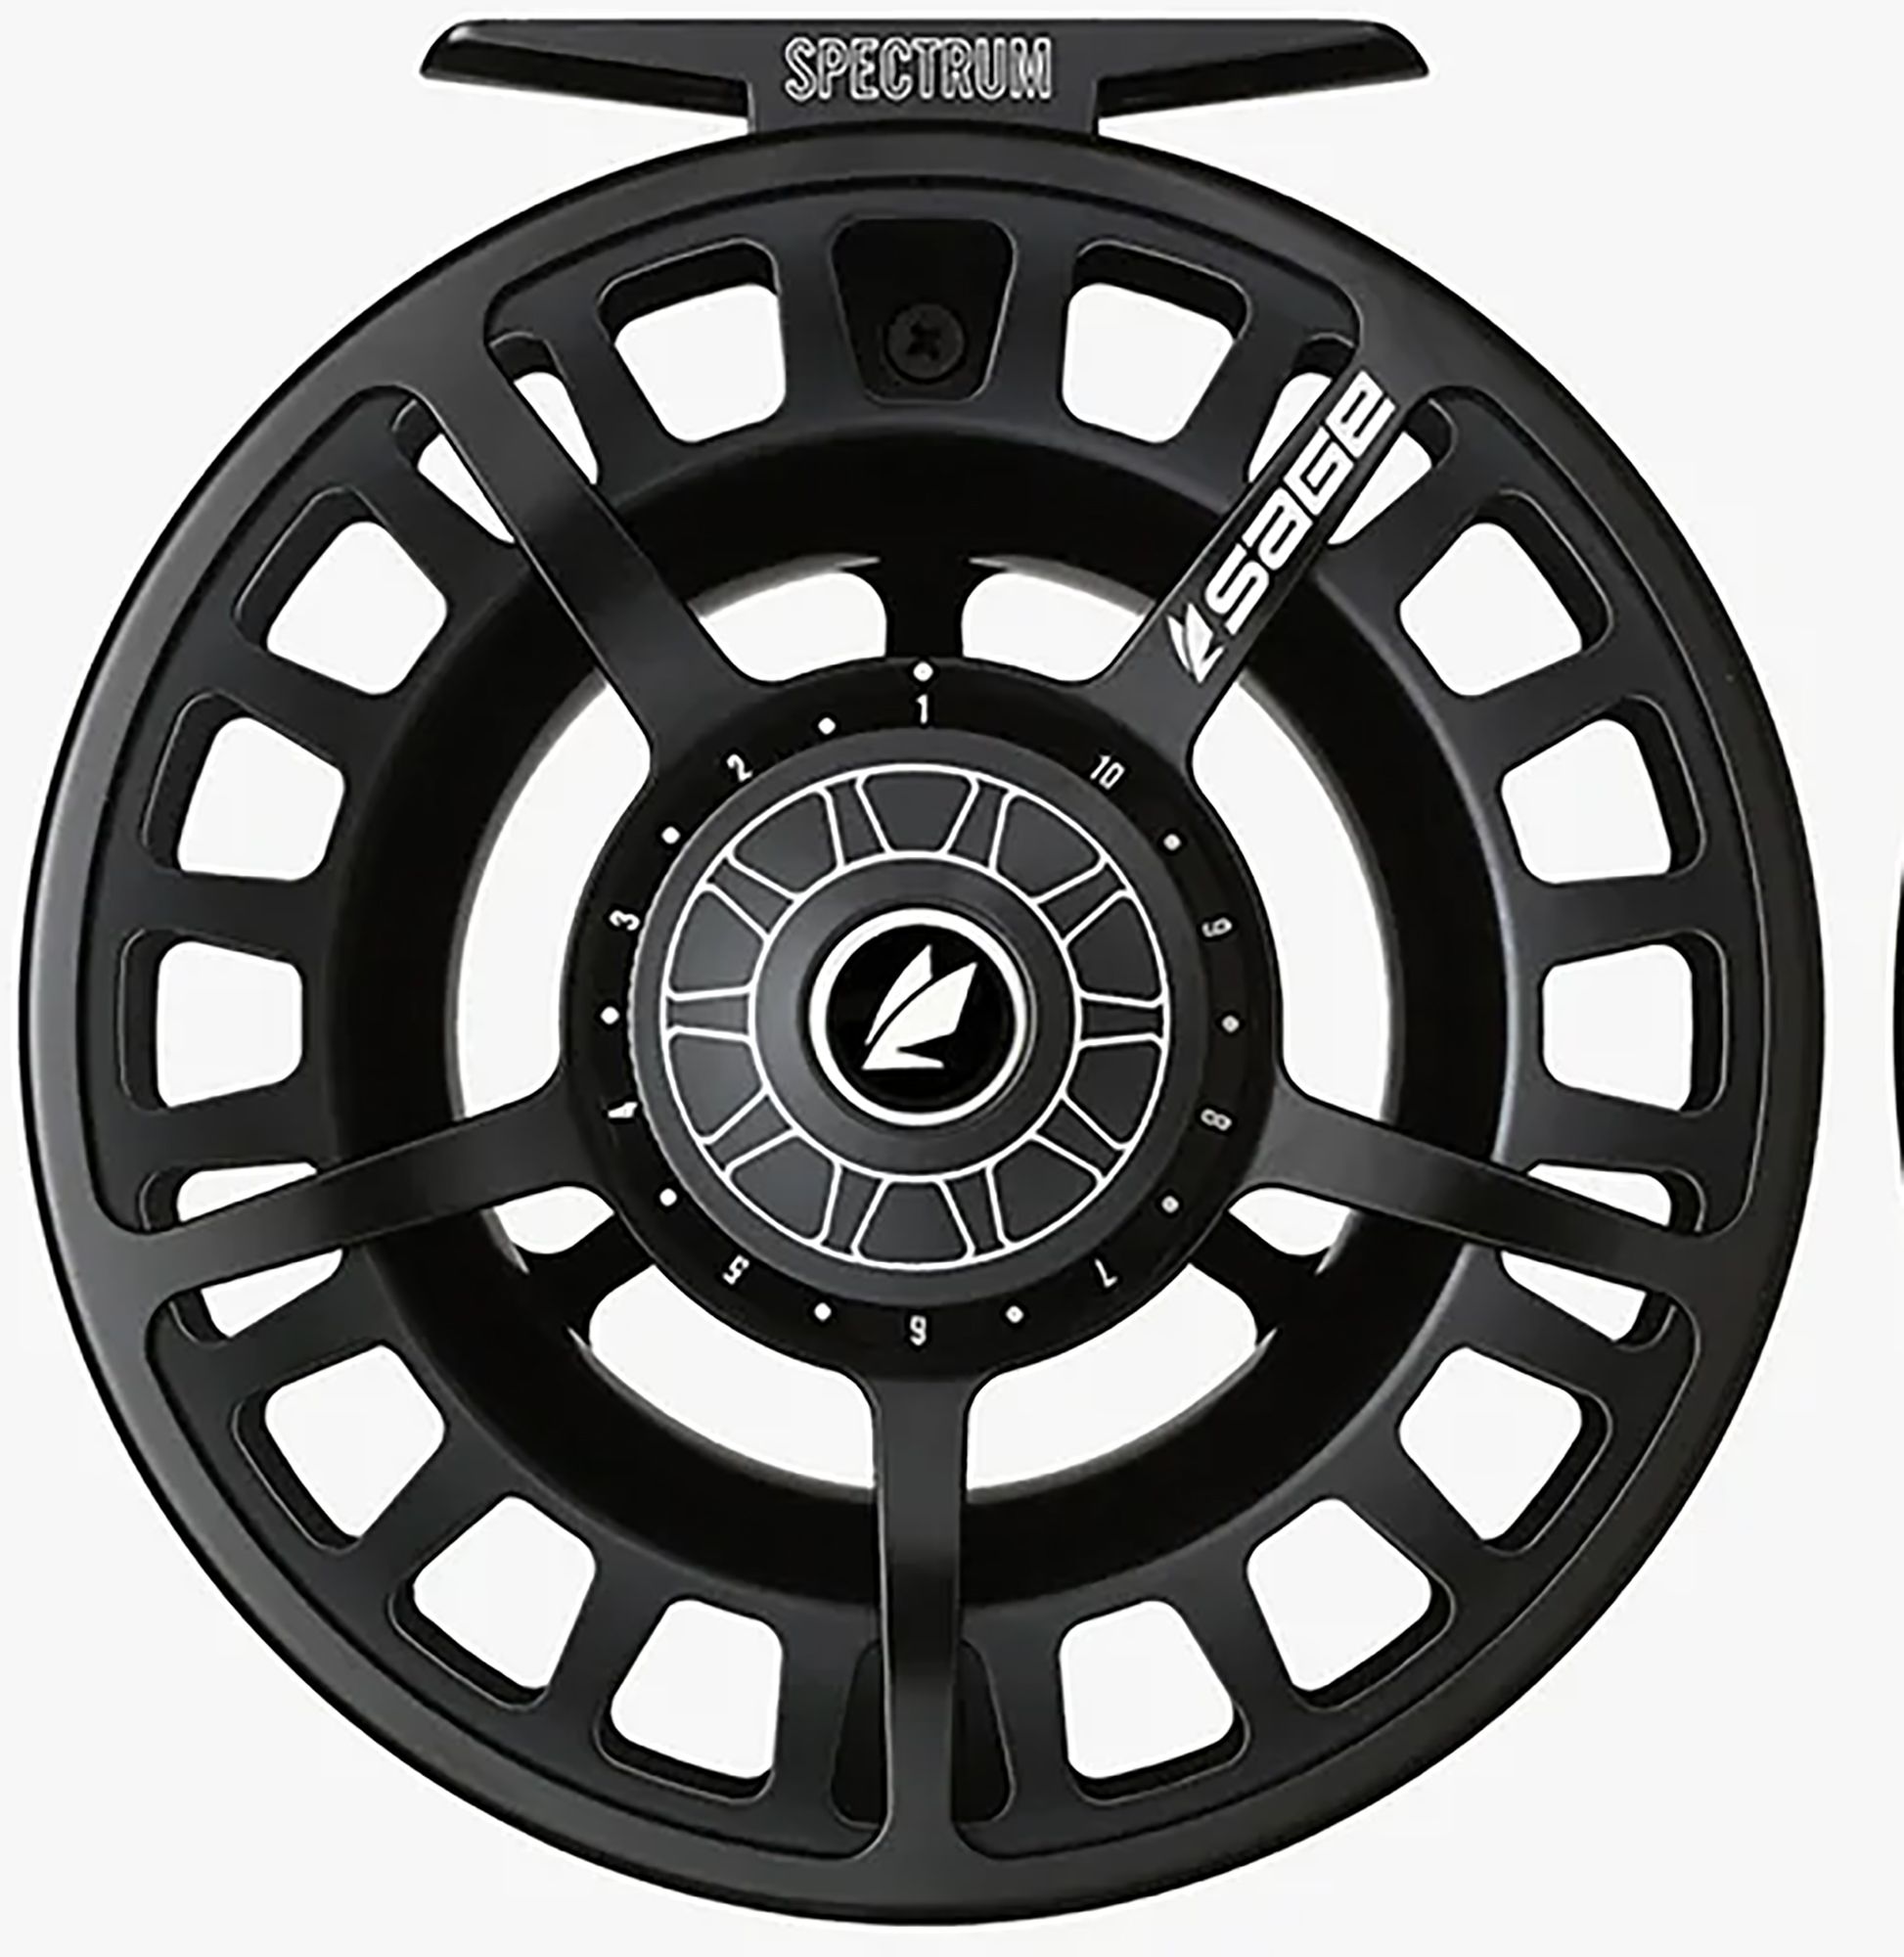 Photos - Other for Fishing Sage Spectrum Fly Reel, Black 21SGEUSPCTRM56BLCREE 